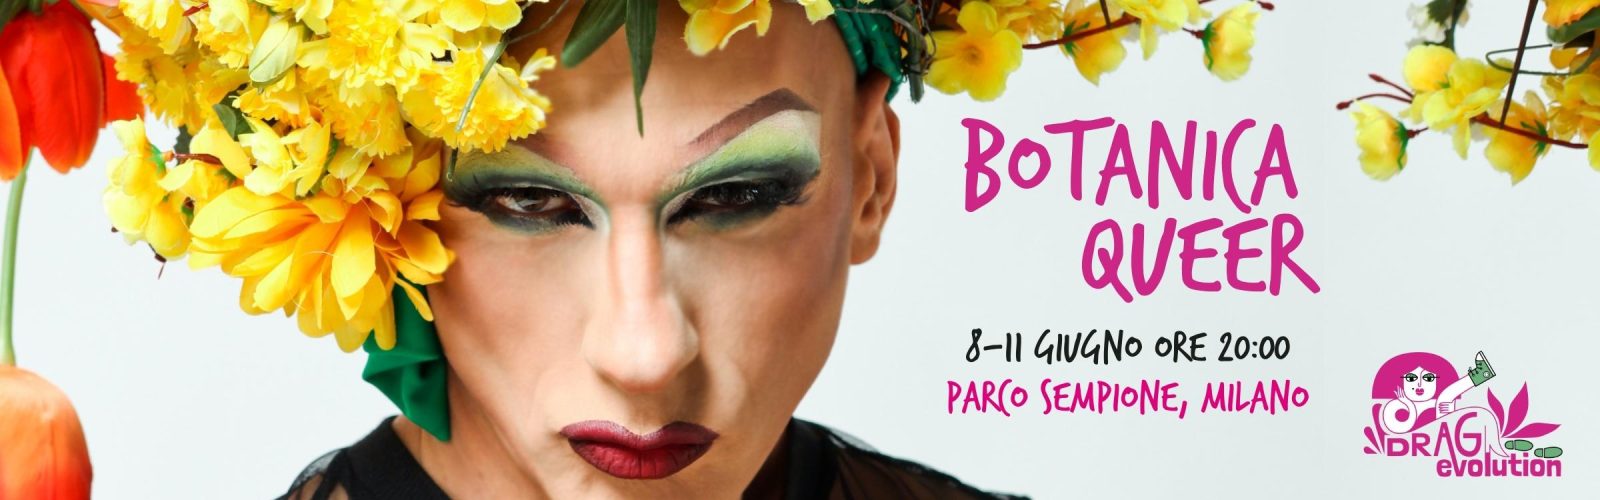 BOTANICA QUEER per homepage sito